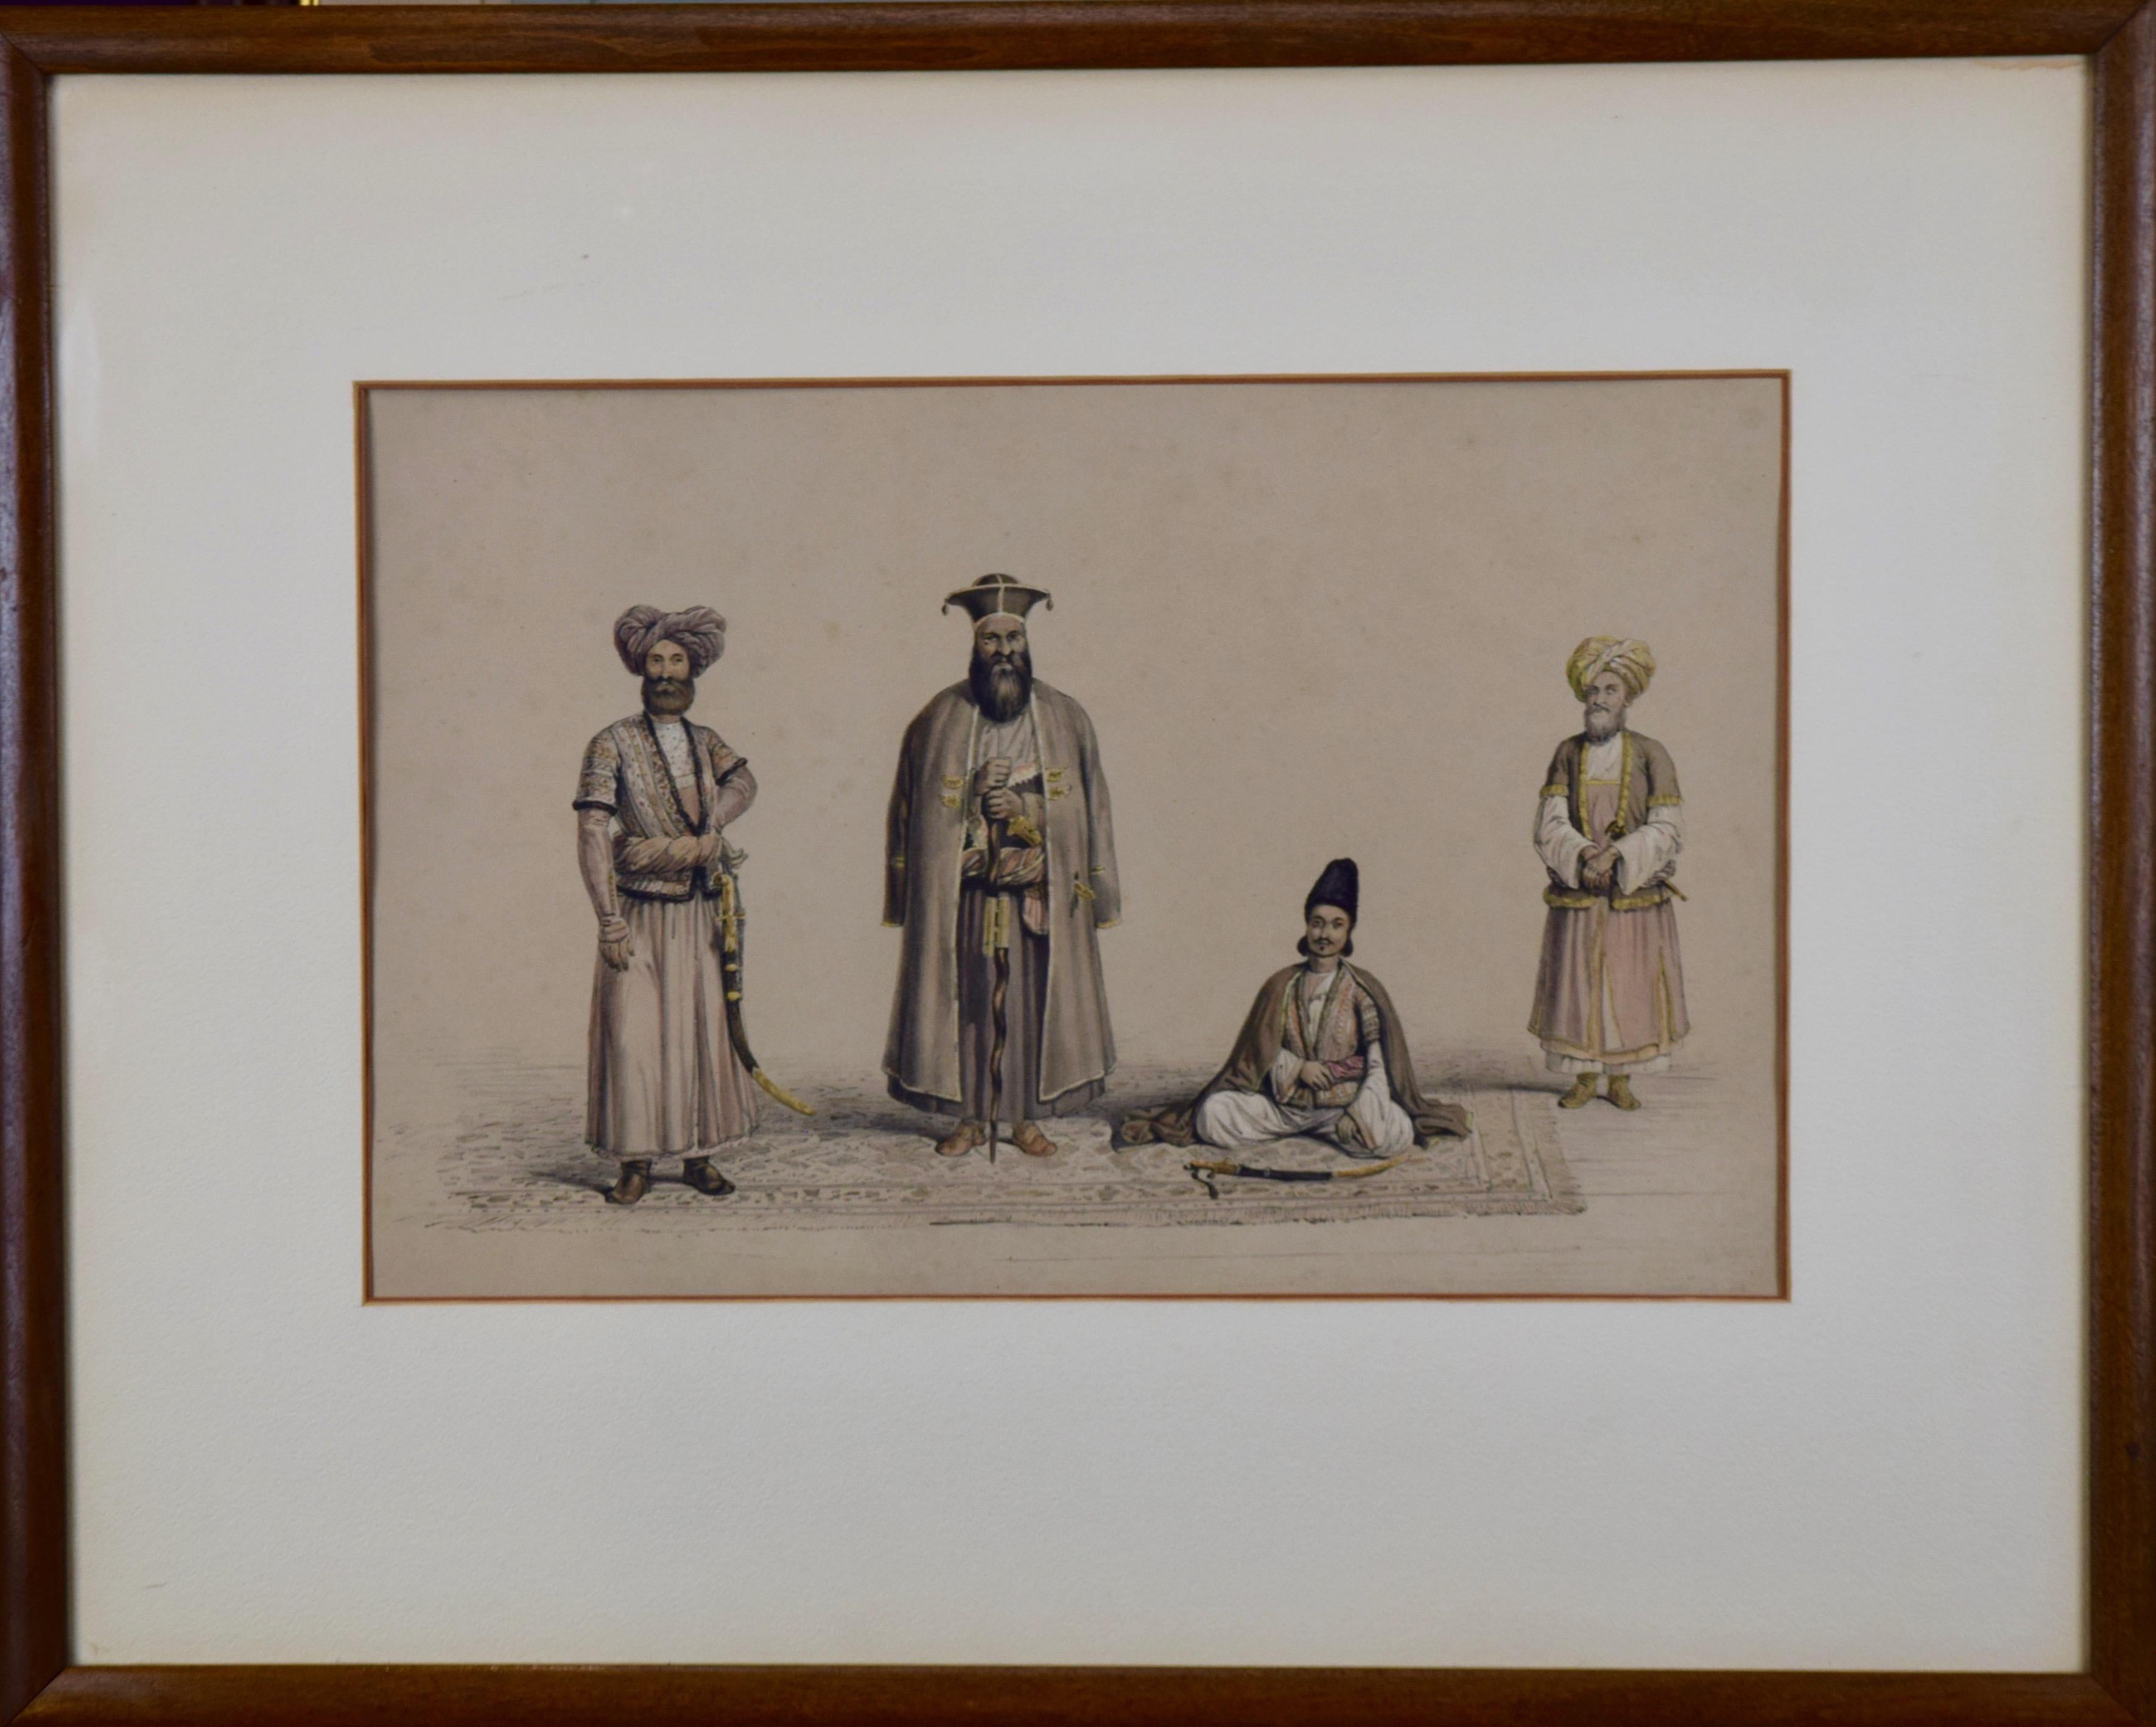 A Pair of 19th C. Engravings Depicting the Costumes and Weapons of Afghani Men - Gray Portrait Print by Dr. James Atkinson